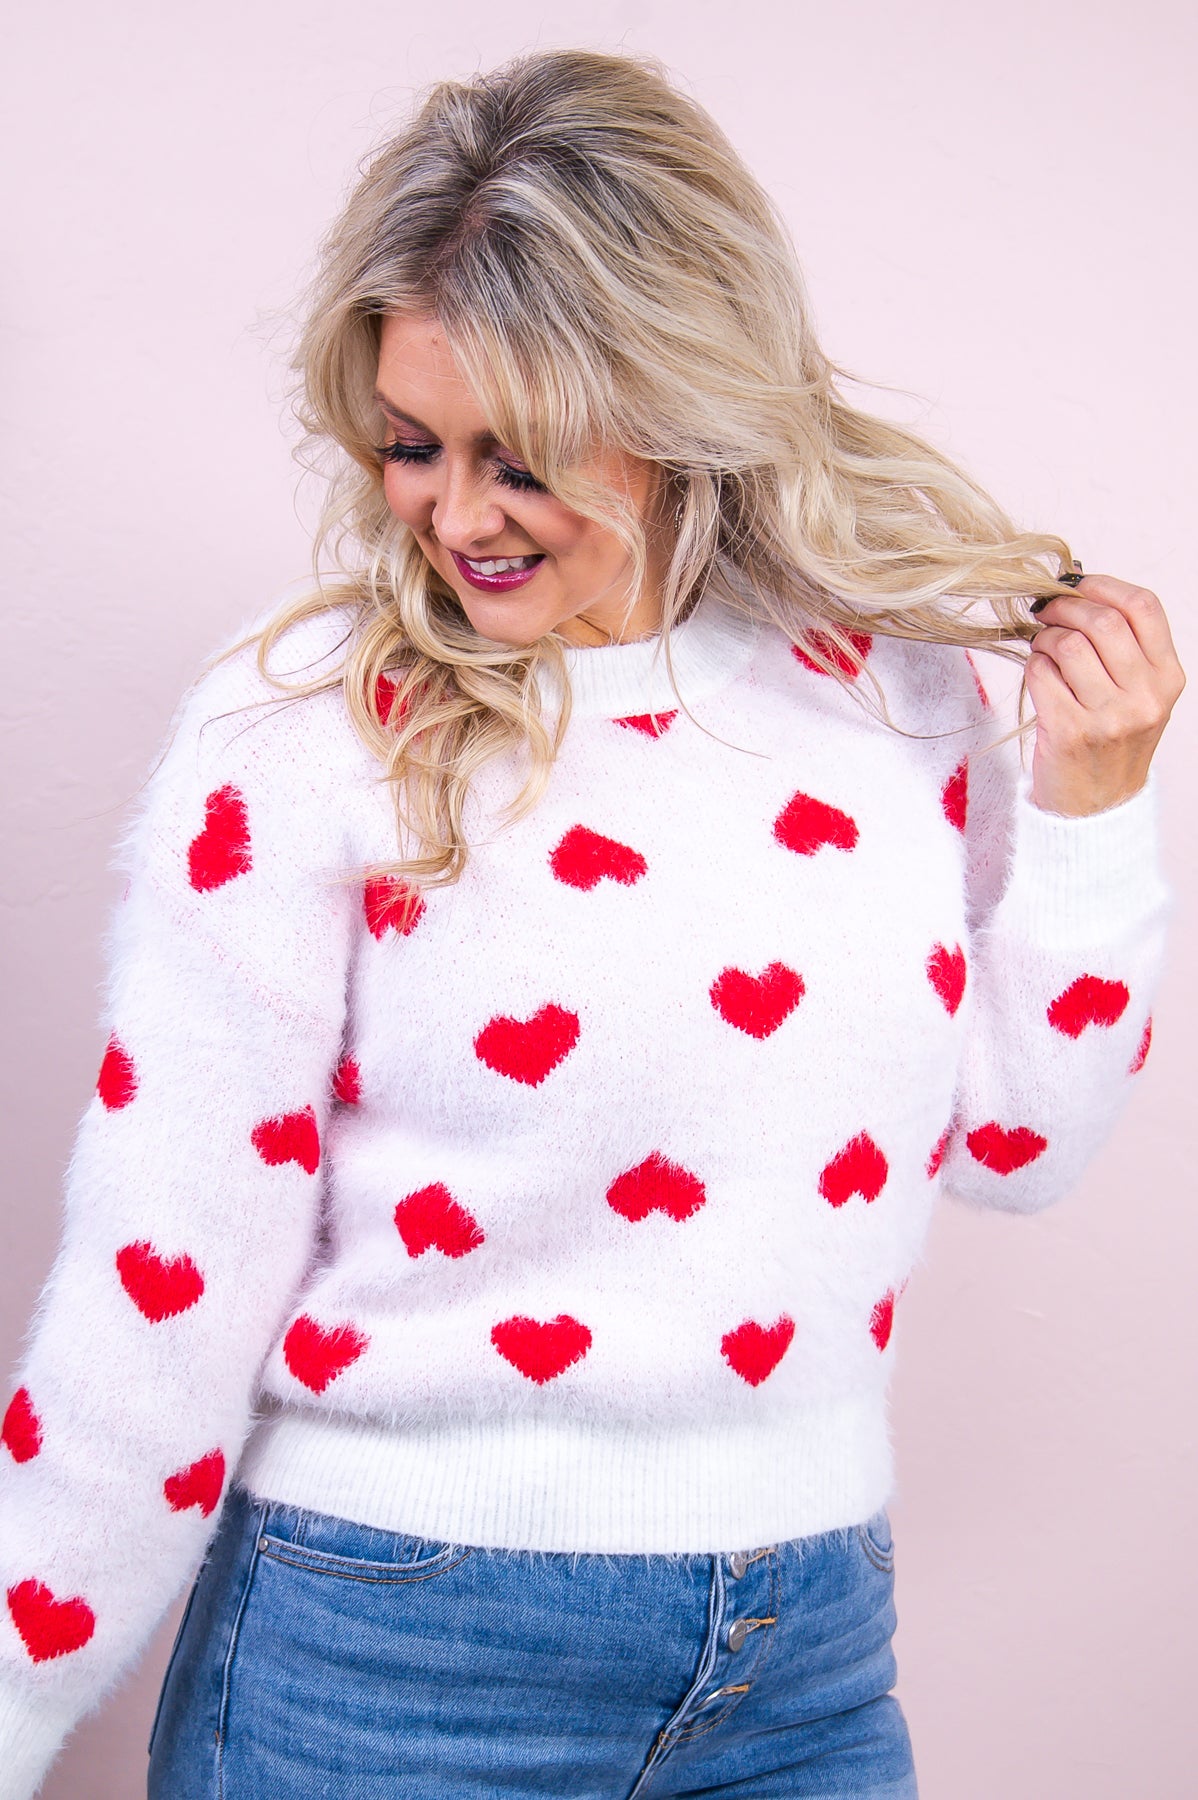 You're My Dream Come True White/Red Heart Sweater Top - T8666WH